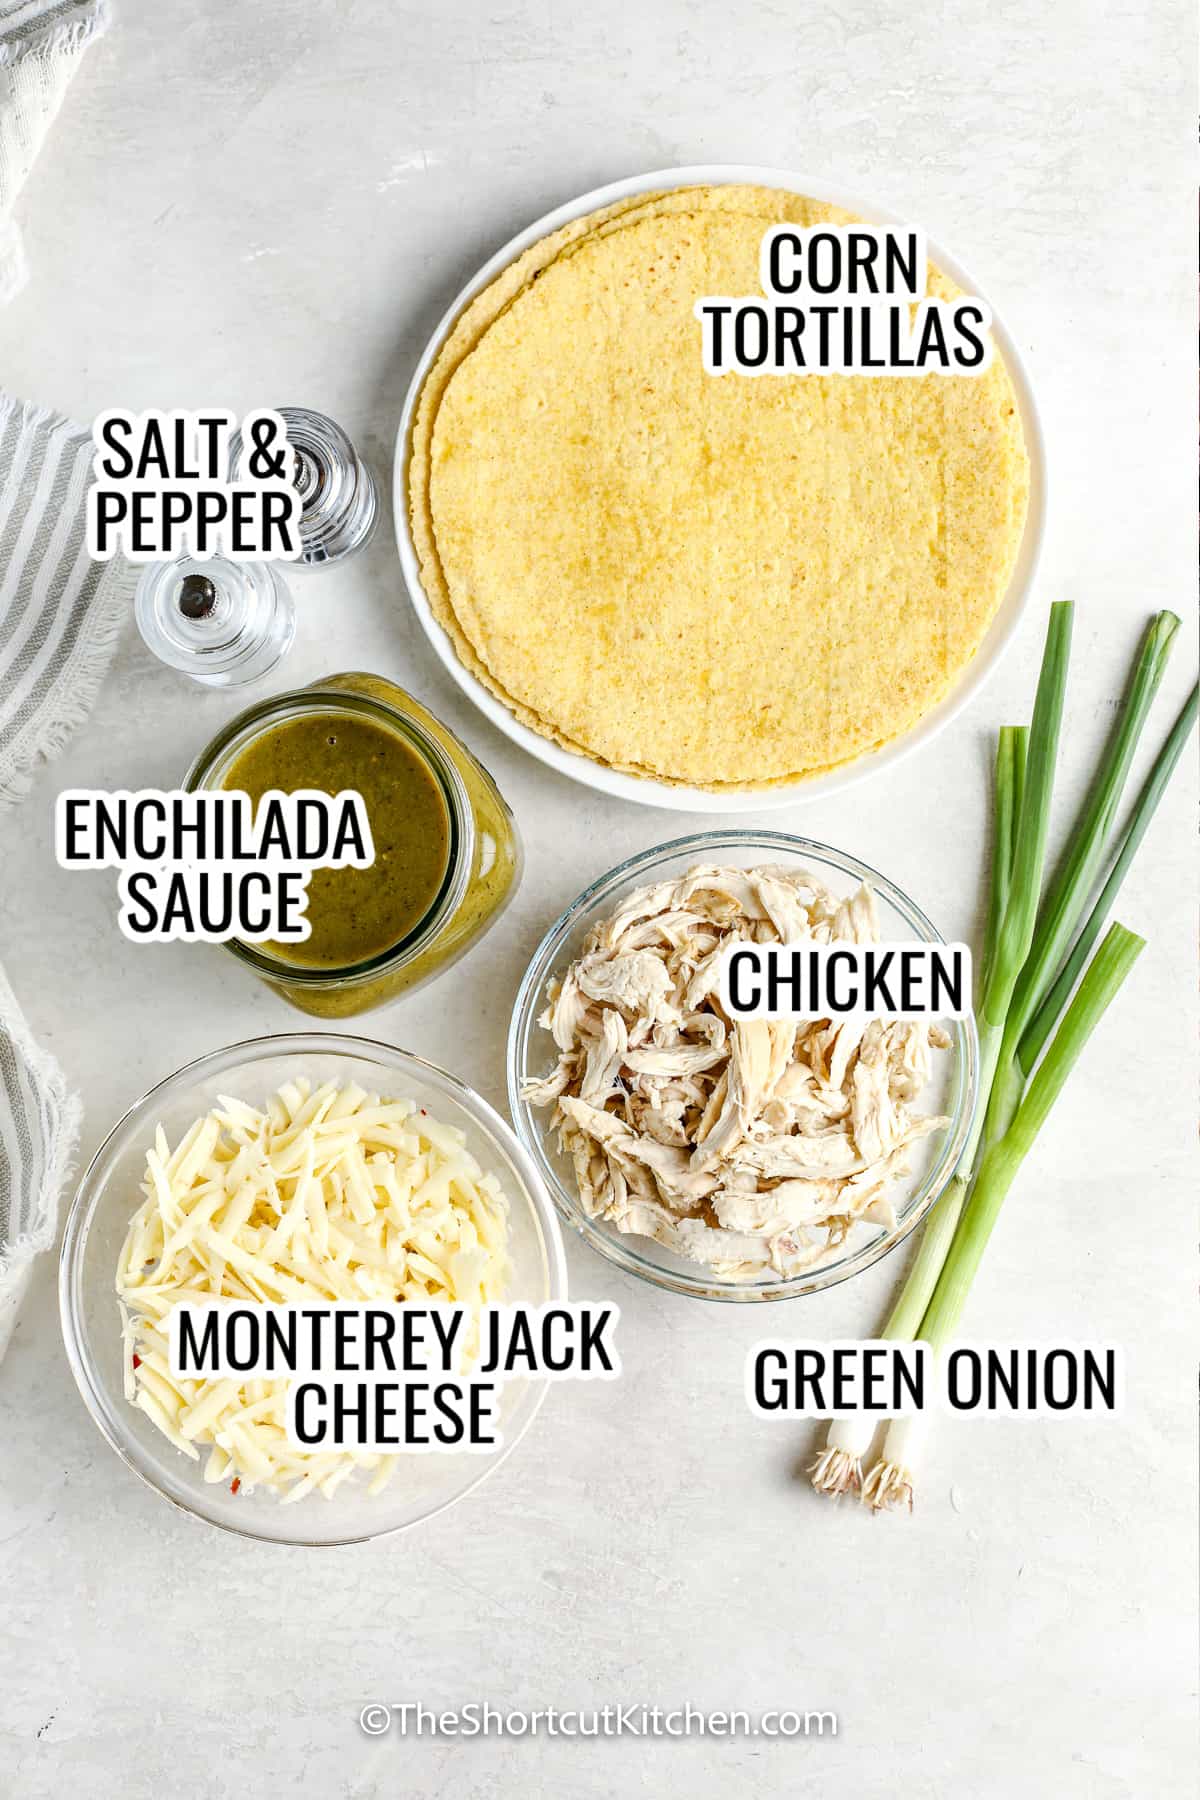 ingredients assembled to make easy chicken enchiladas including corn tortillas, chicken, enchilada sauce, cheese, and green onion